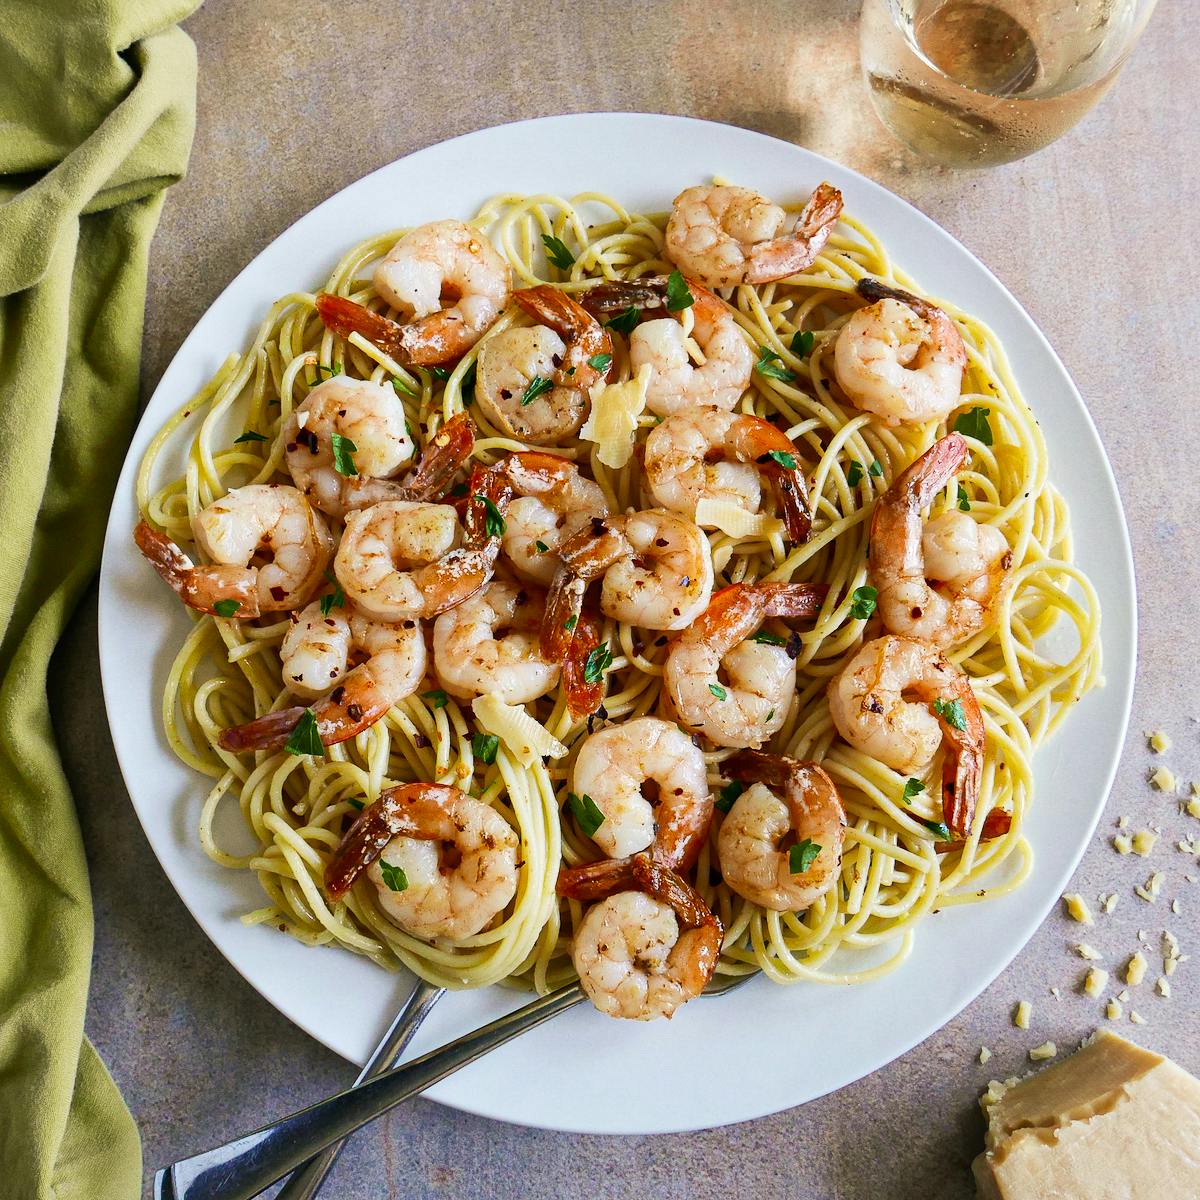 Plate of garlic shrimp spaghetti with a glass of white wine.